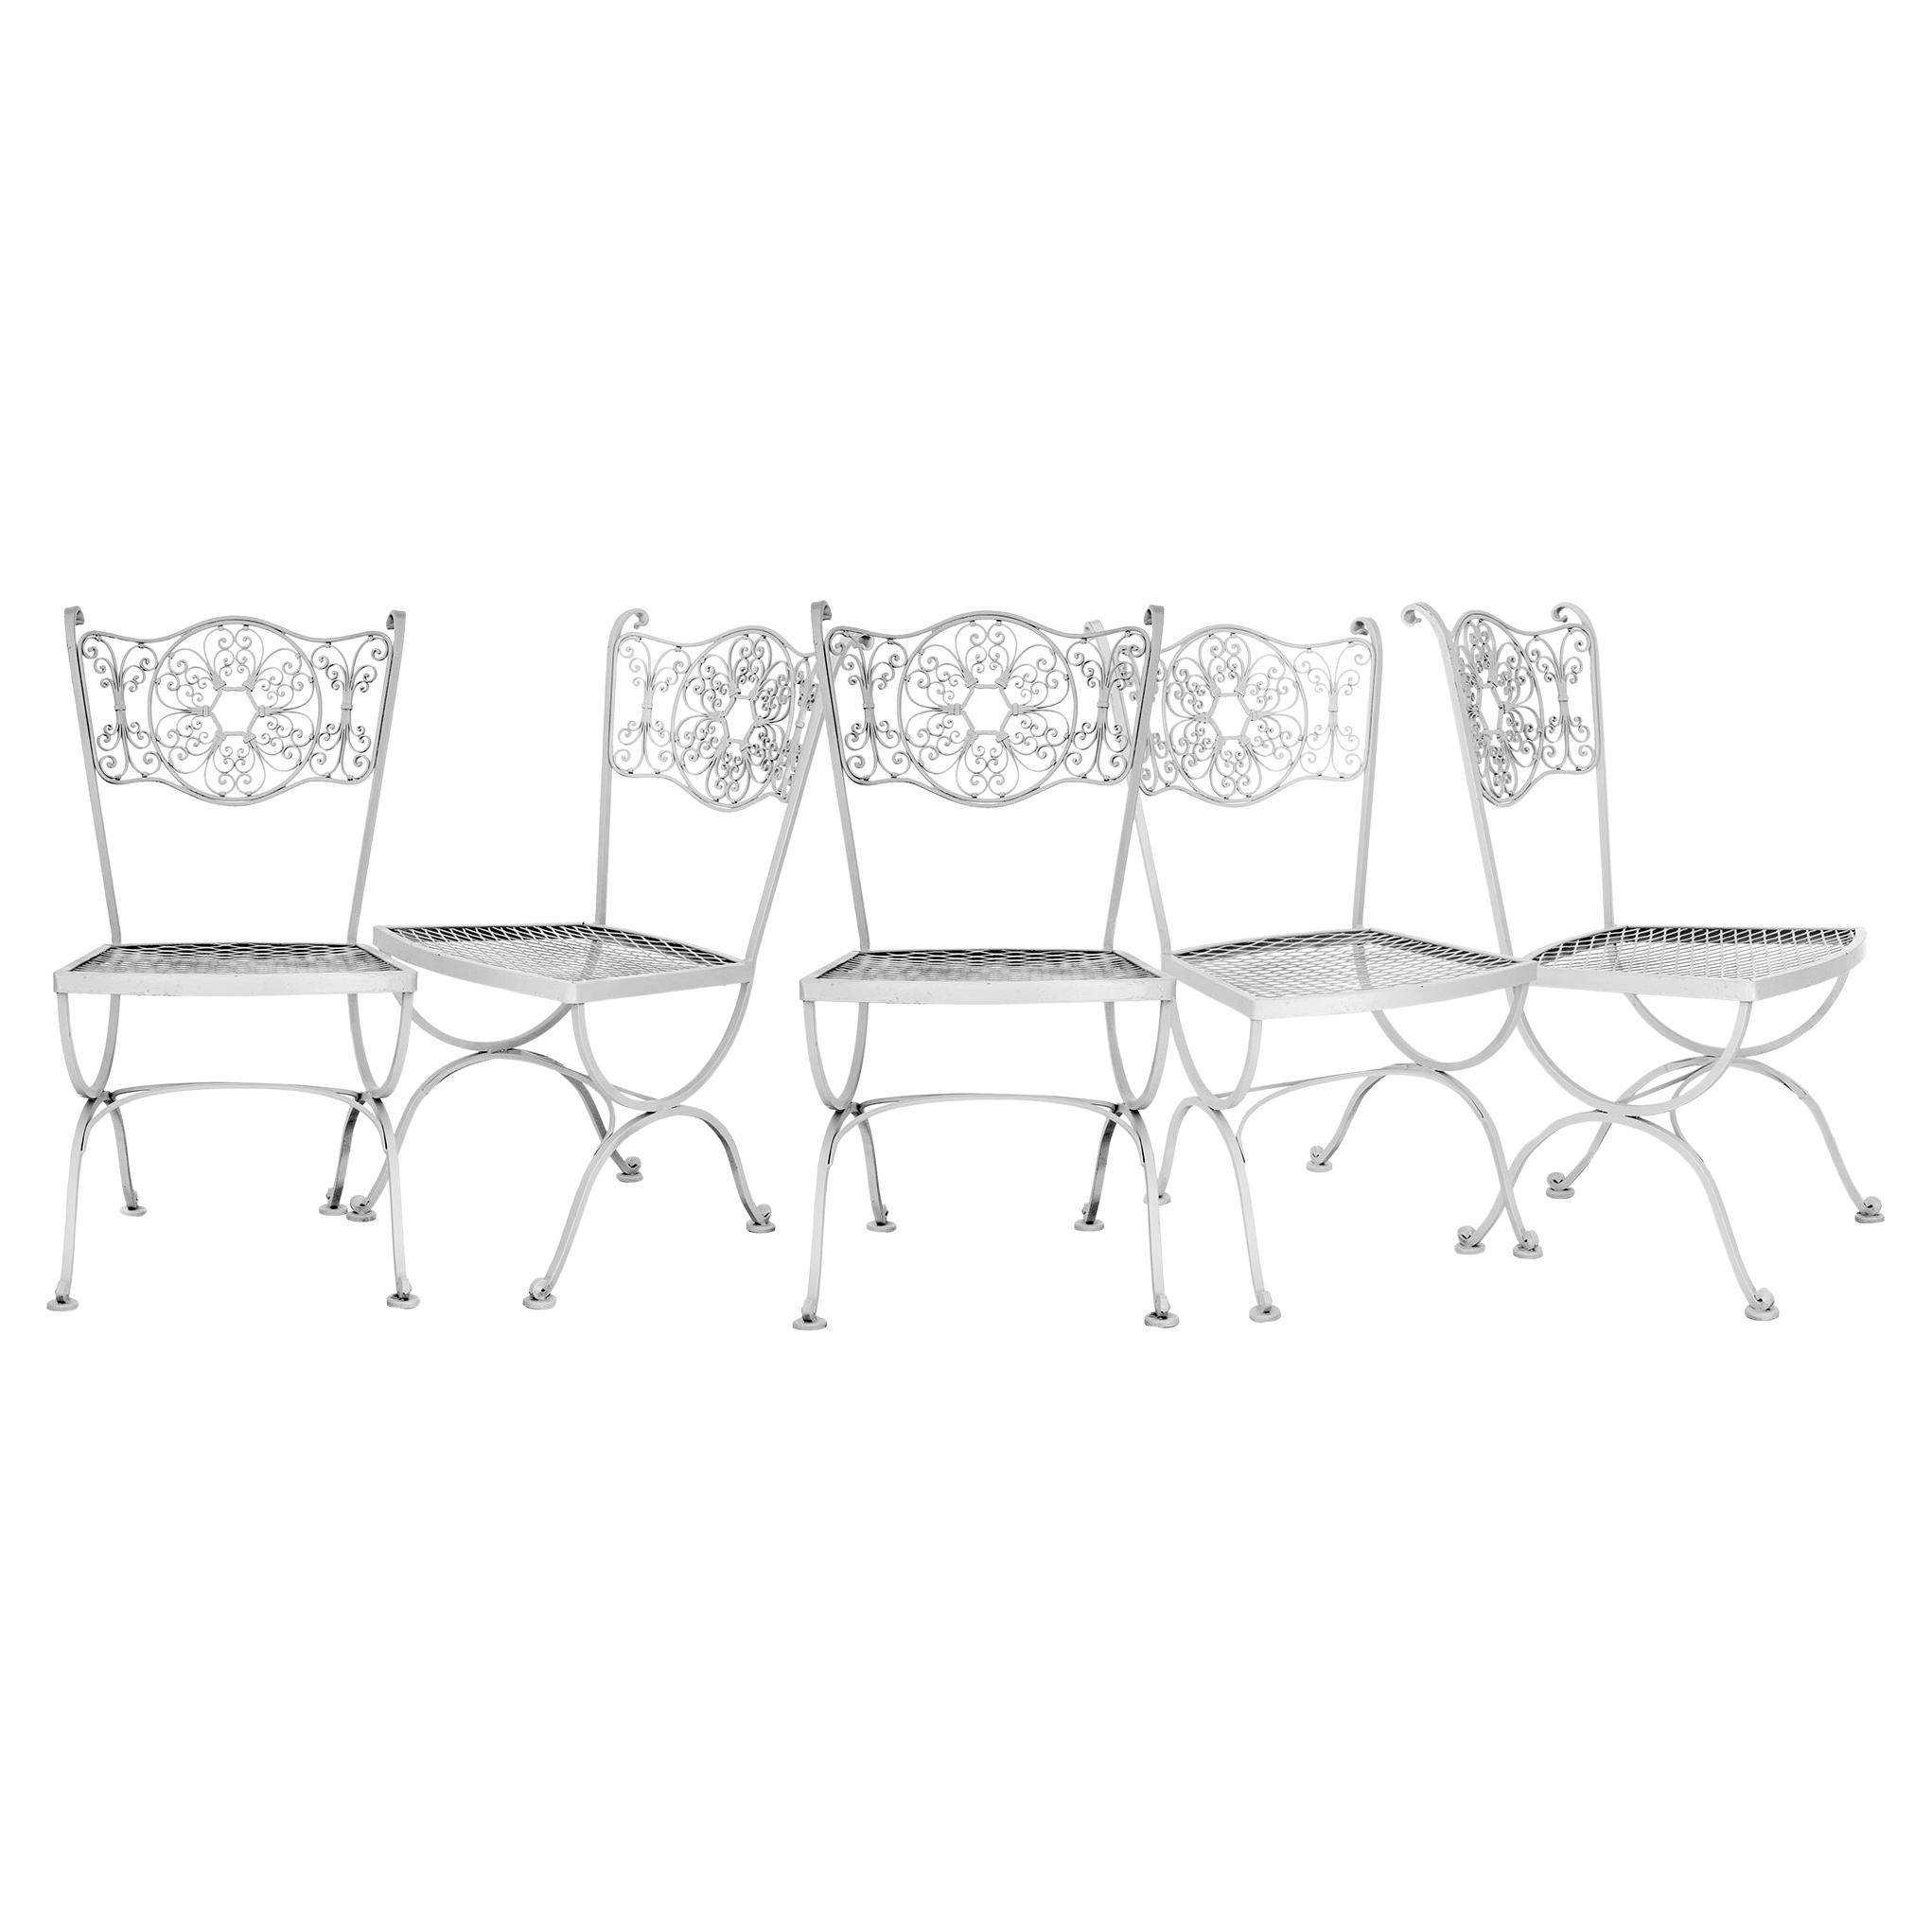  Rare Woodard Andalusian Iron Patio Chairs set/5 For Sale